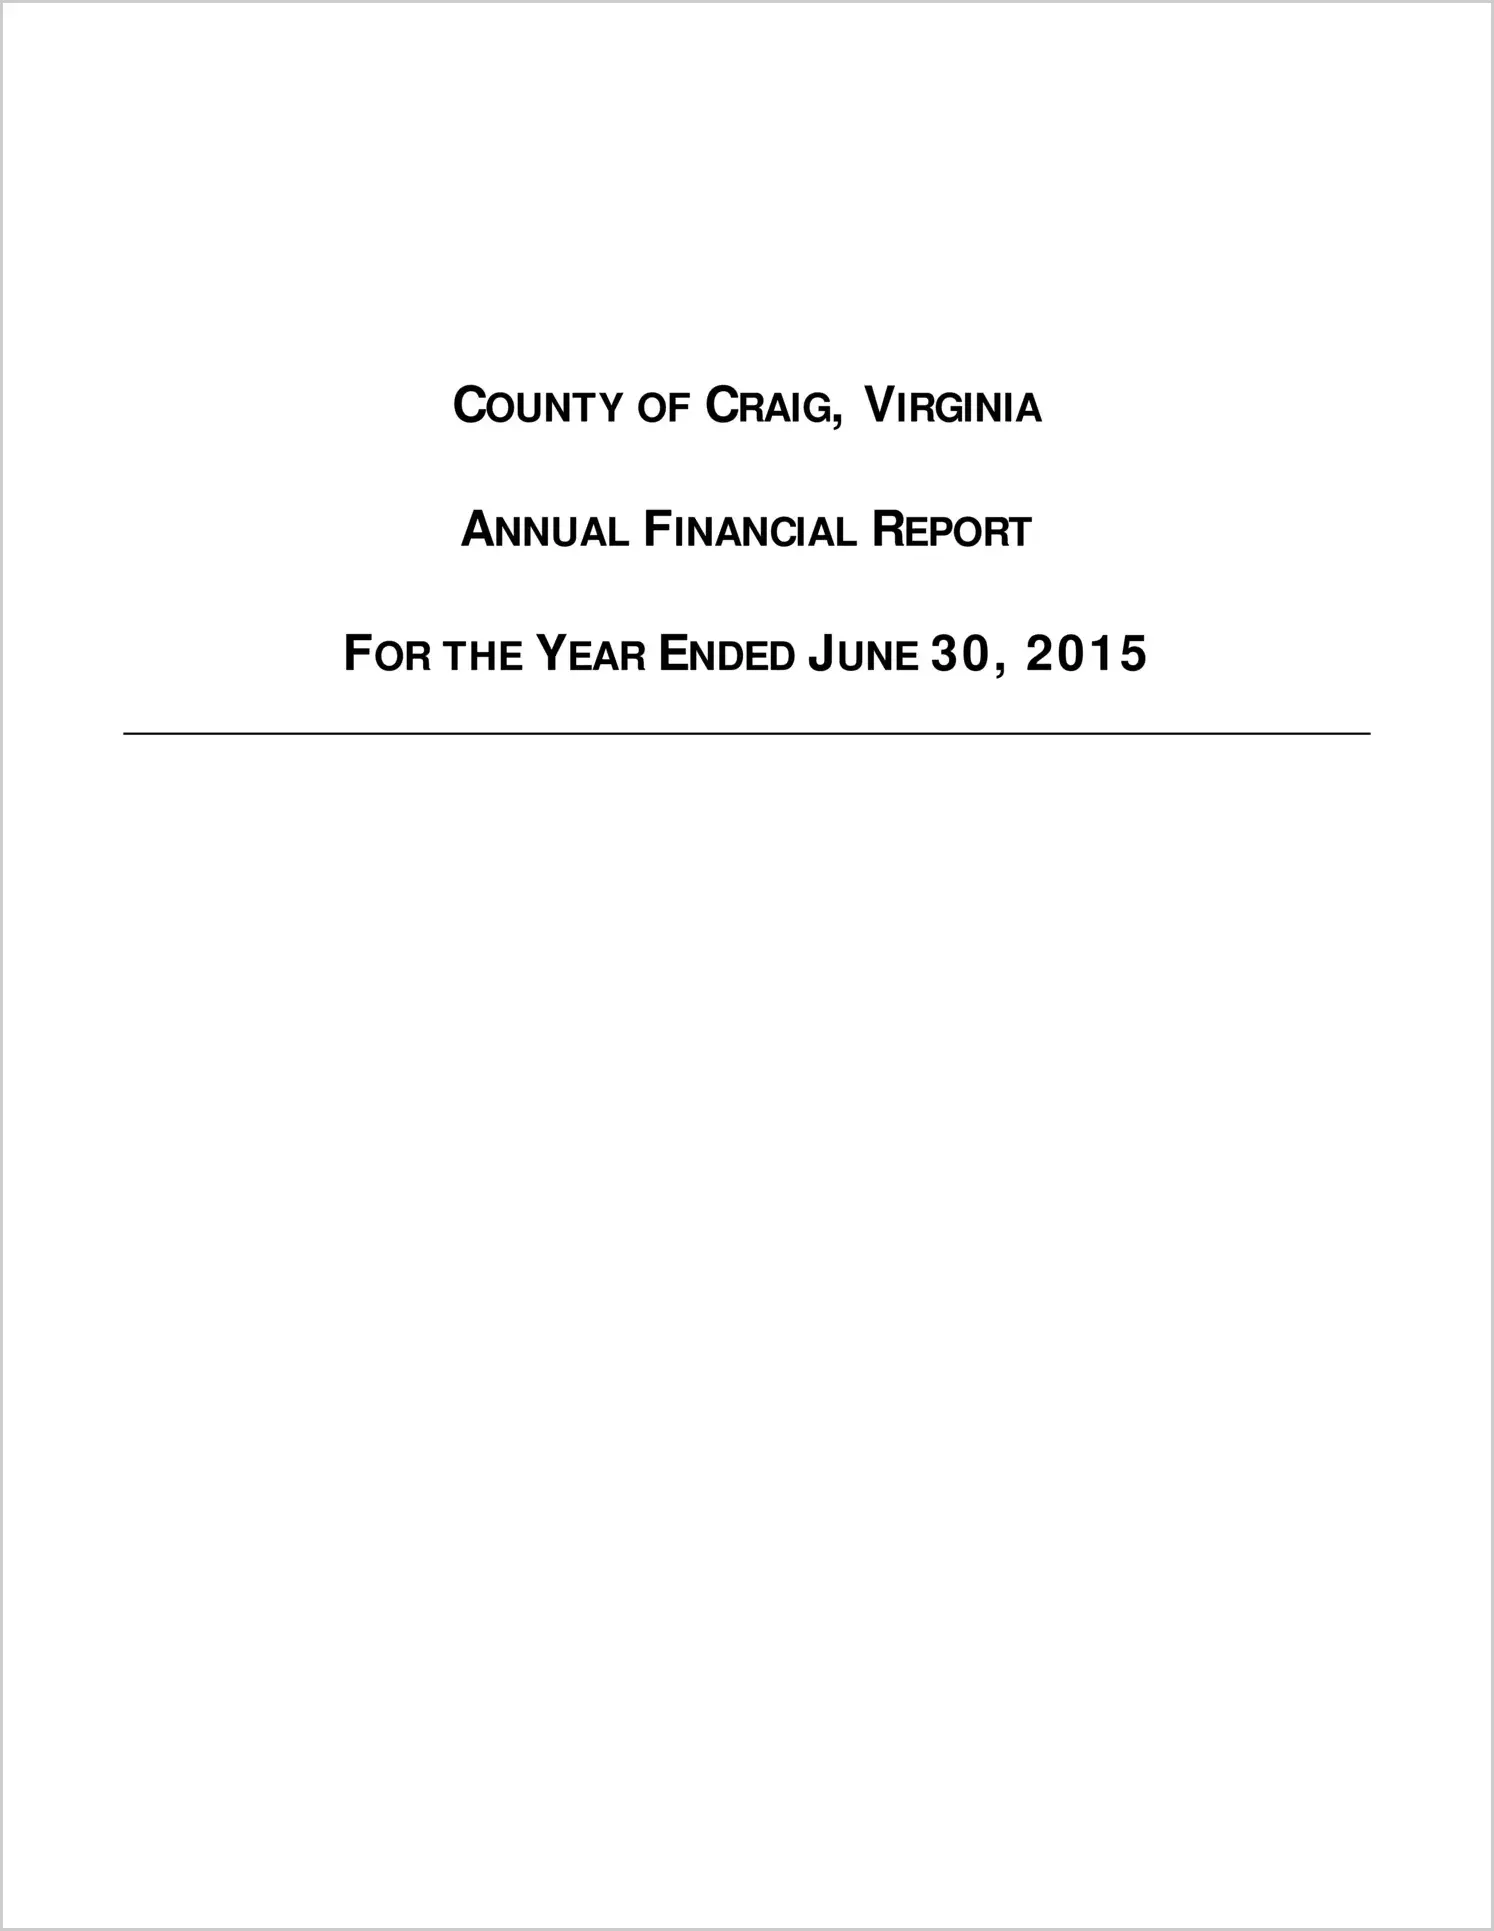 2015 Annual Financial Report for County of Craig